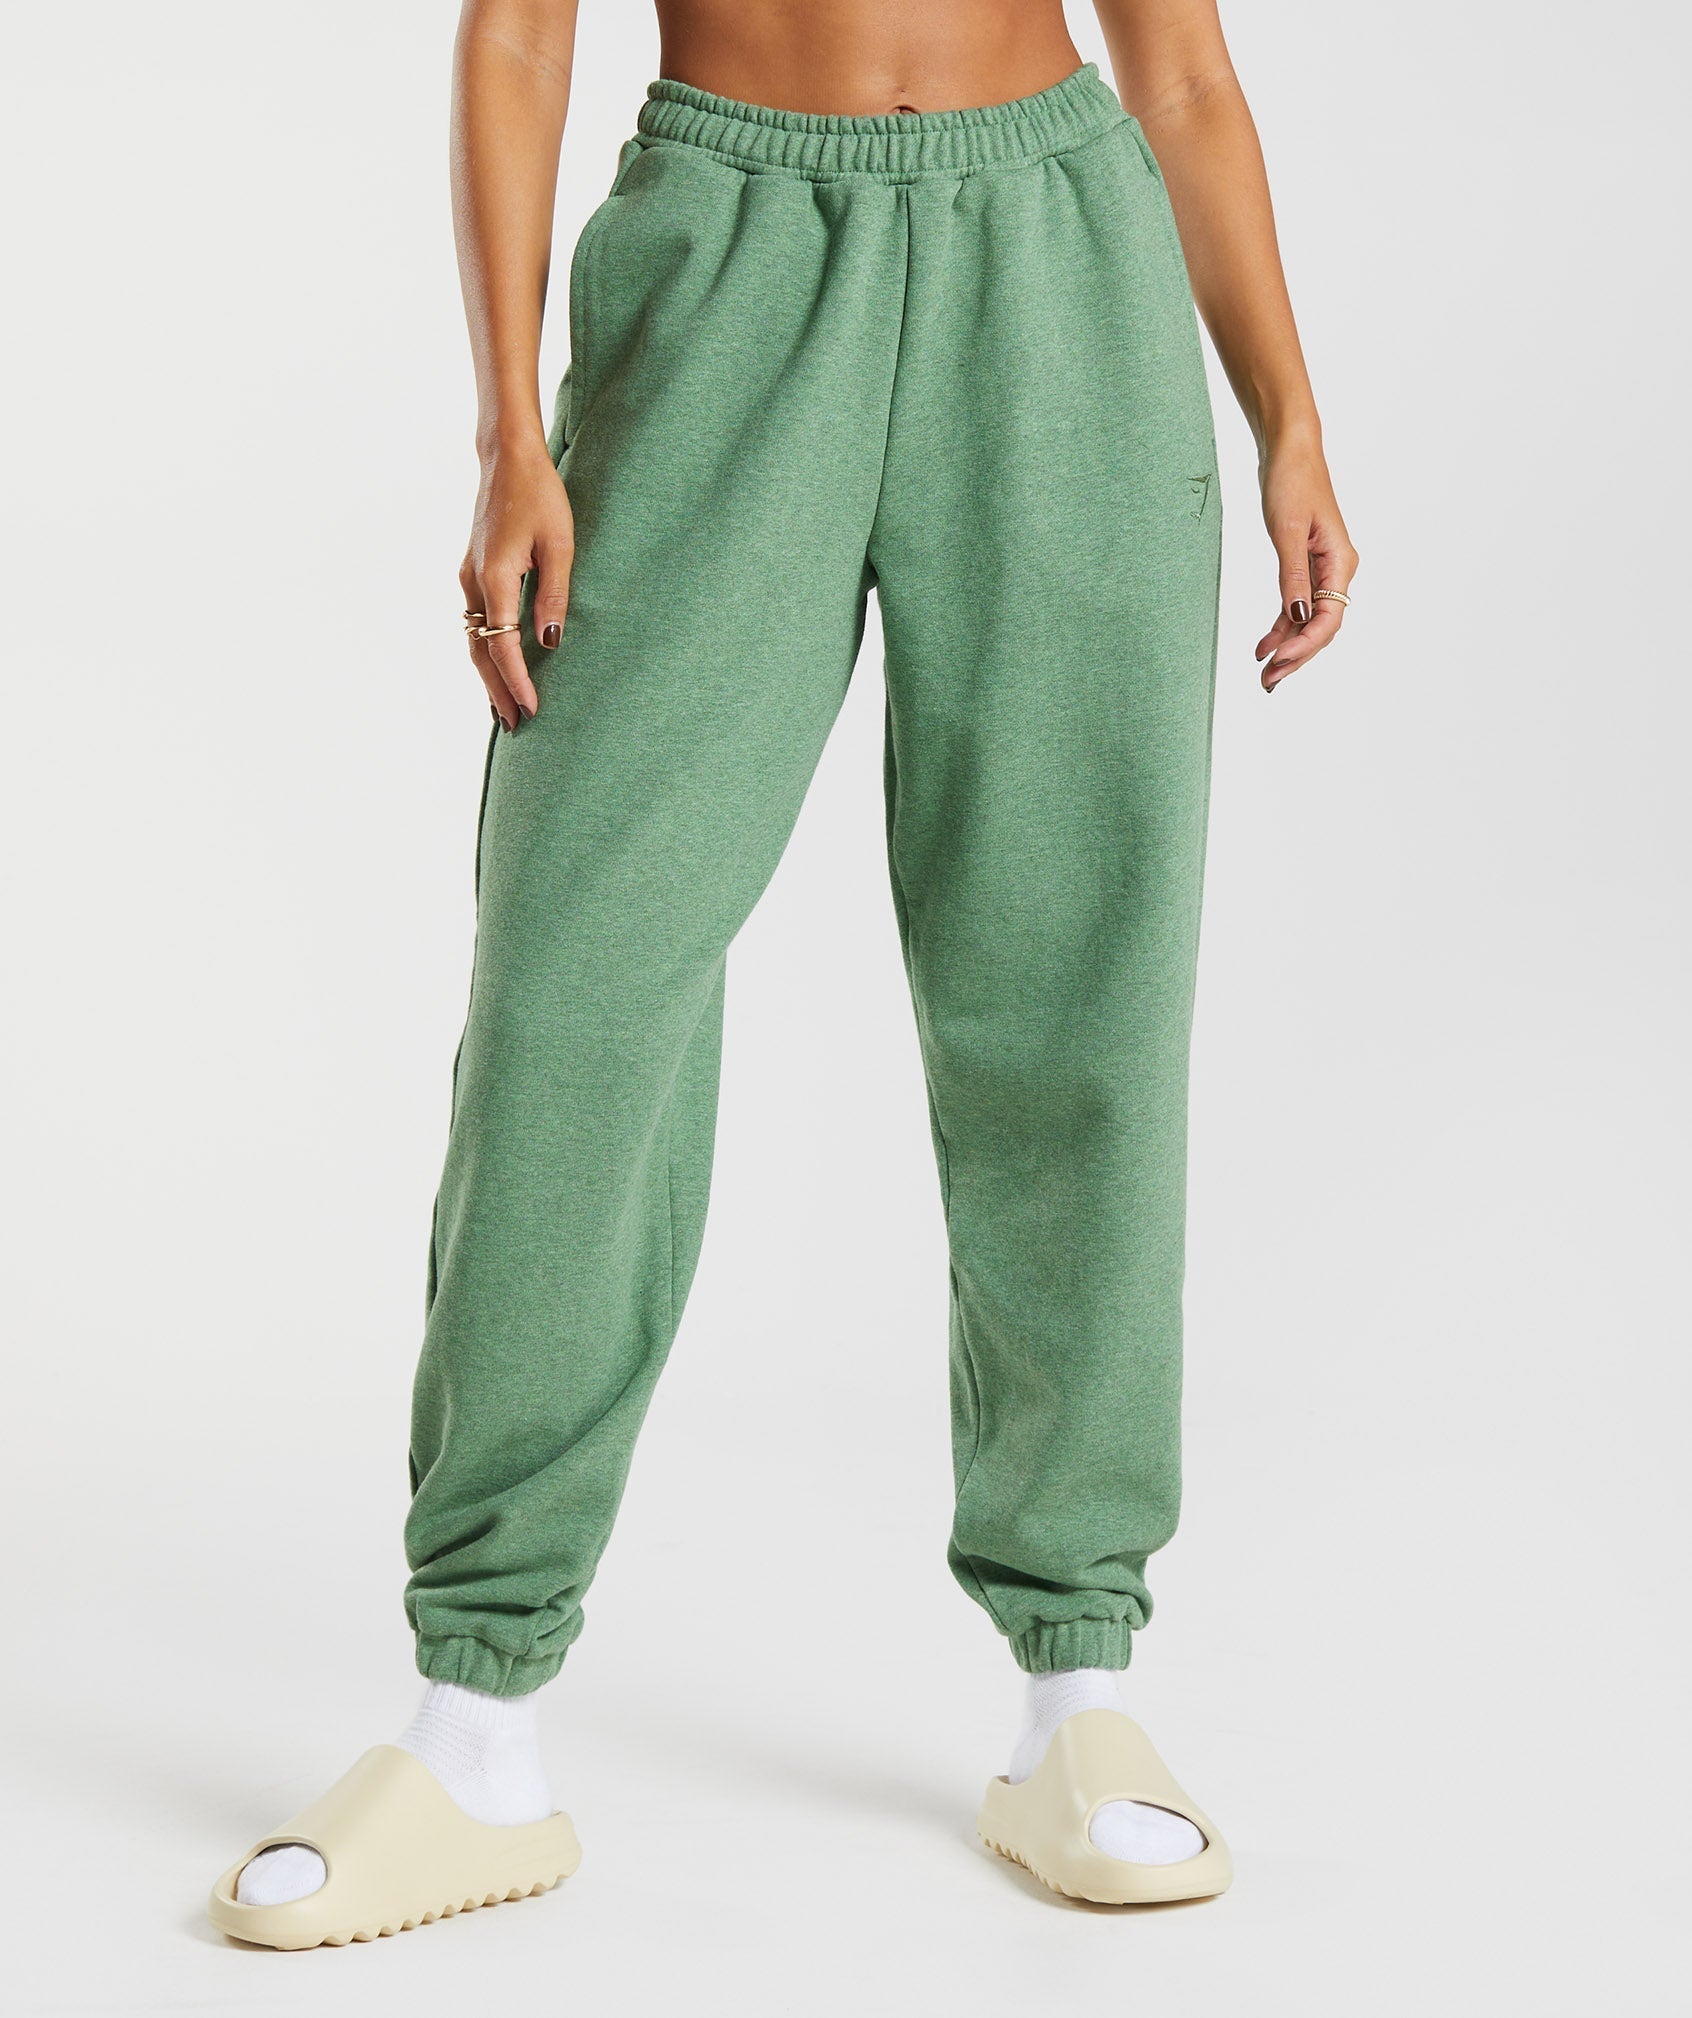 Rest Day Sweats Joggers in {{variantColor} is out of stock